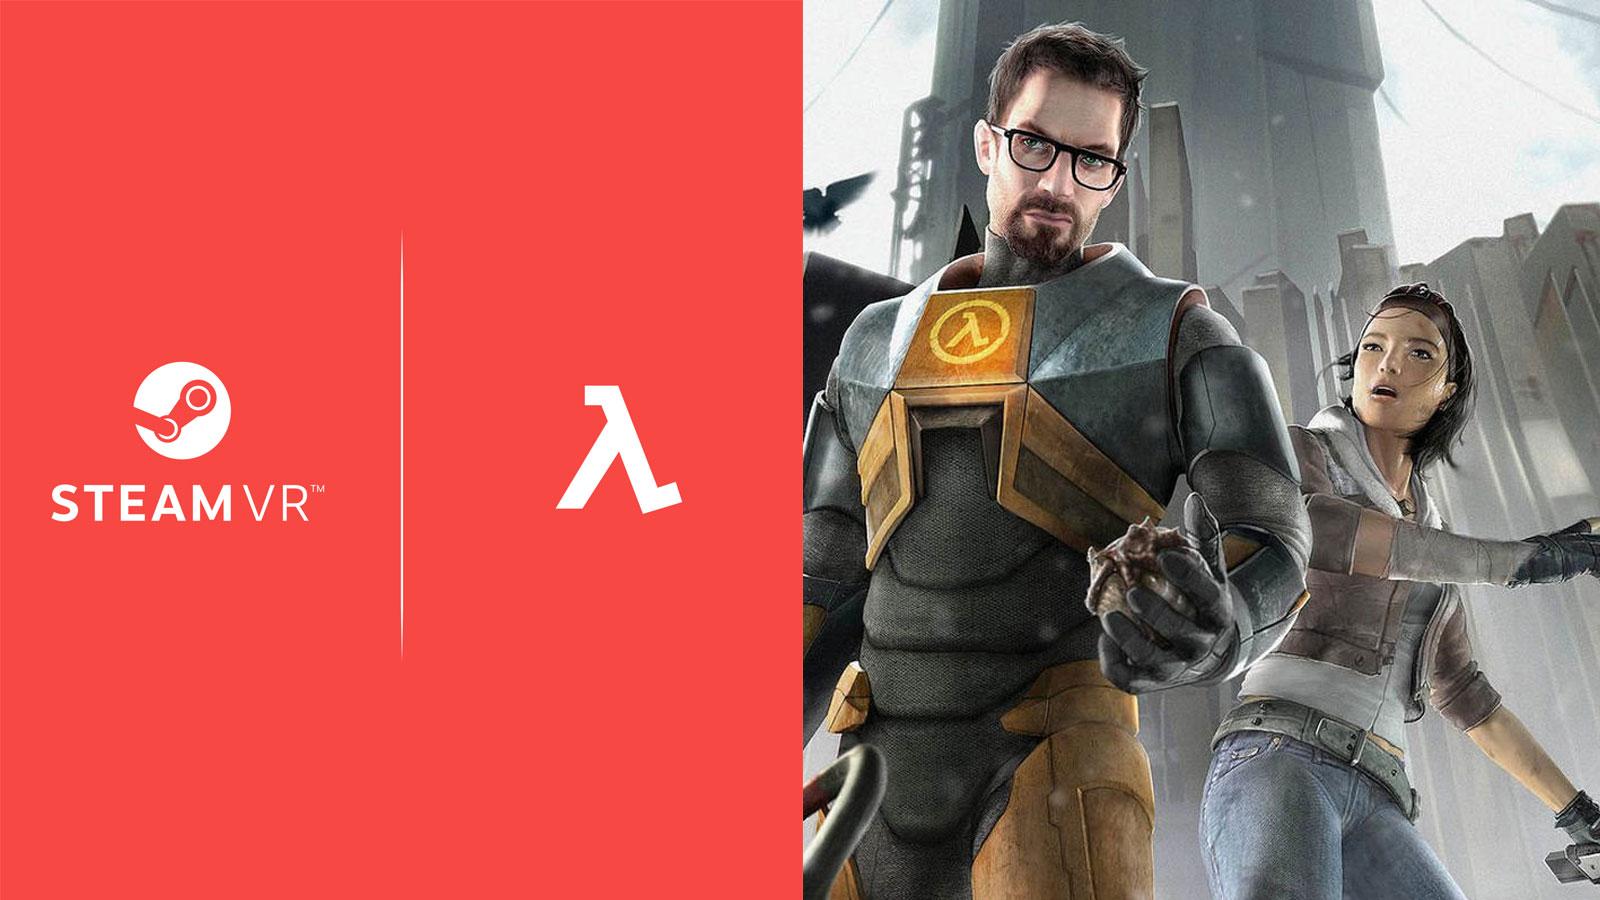 Here's What Reviewers Are Saying About Half-Life: Alyx